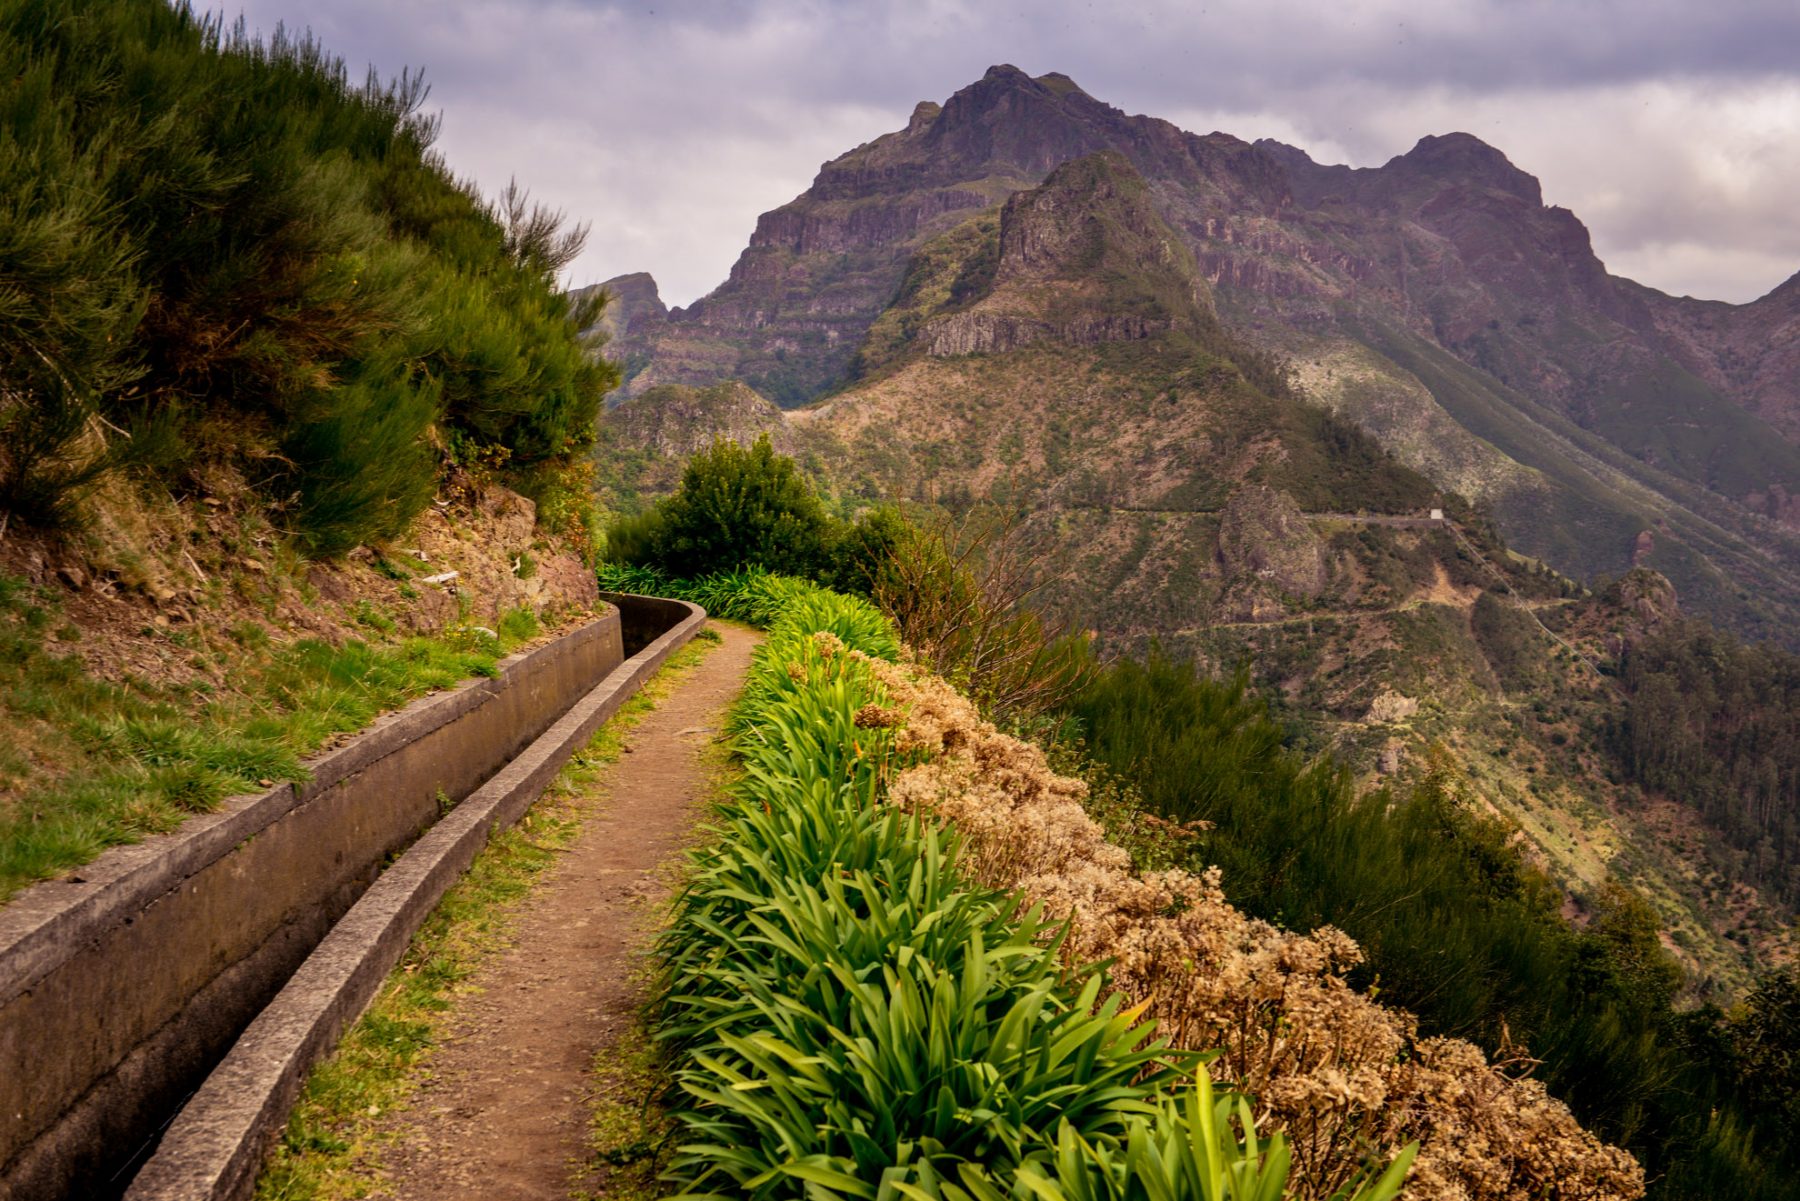 The mountains and levadas of Madeira